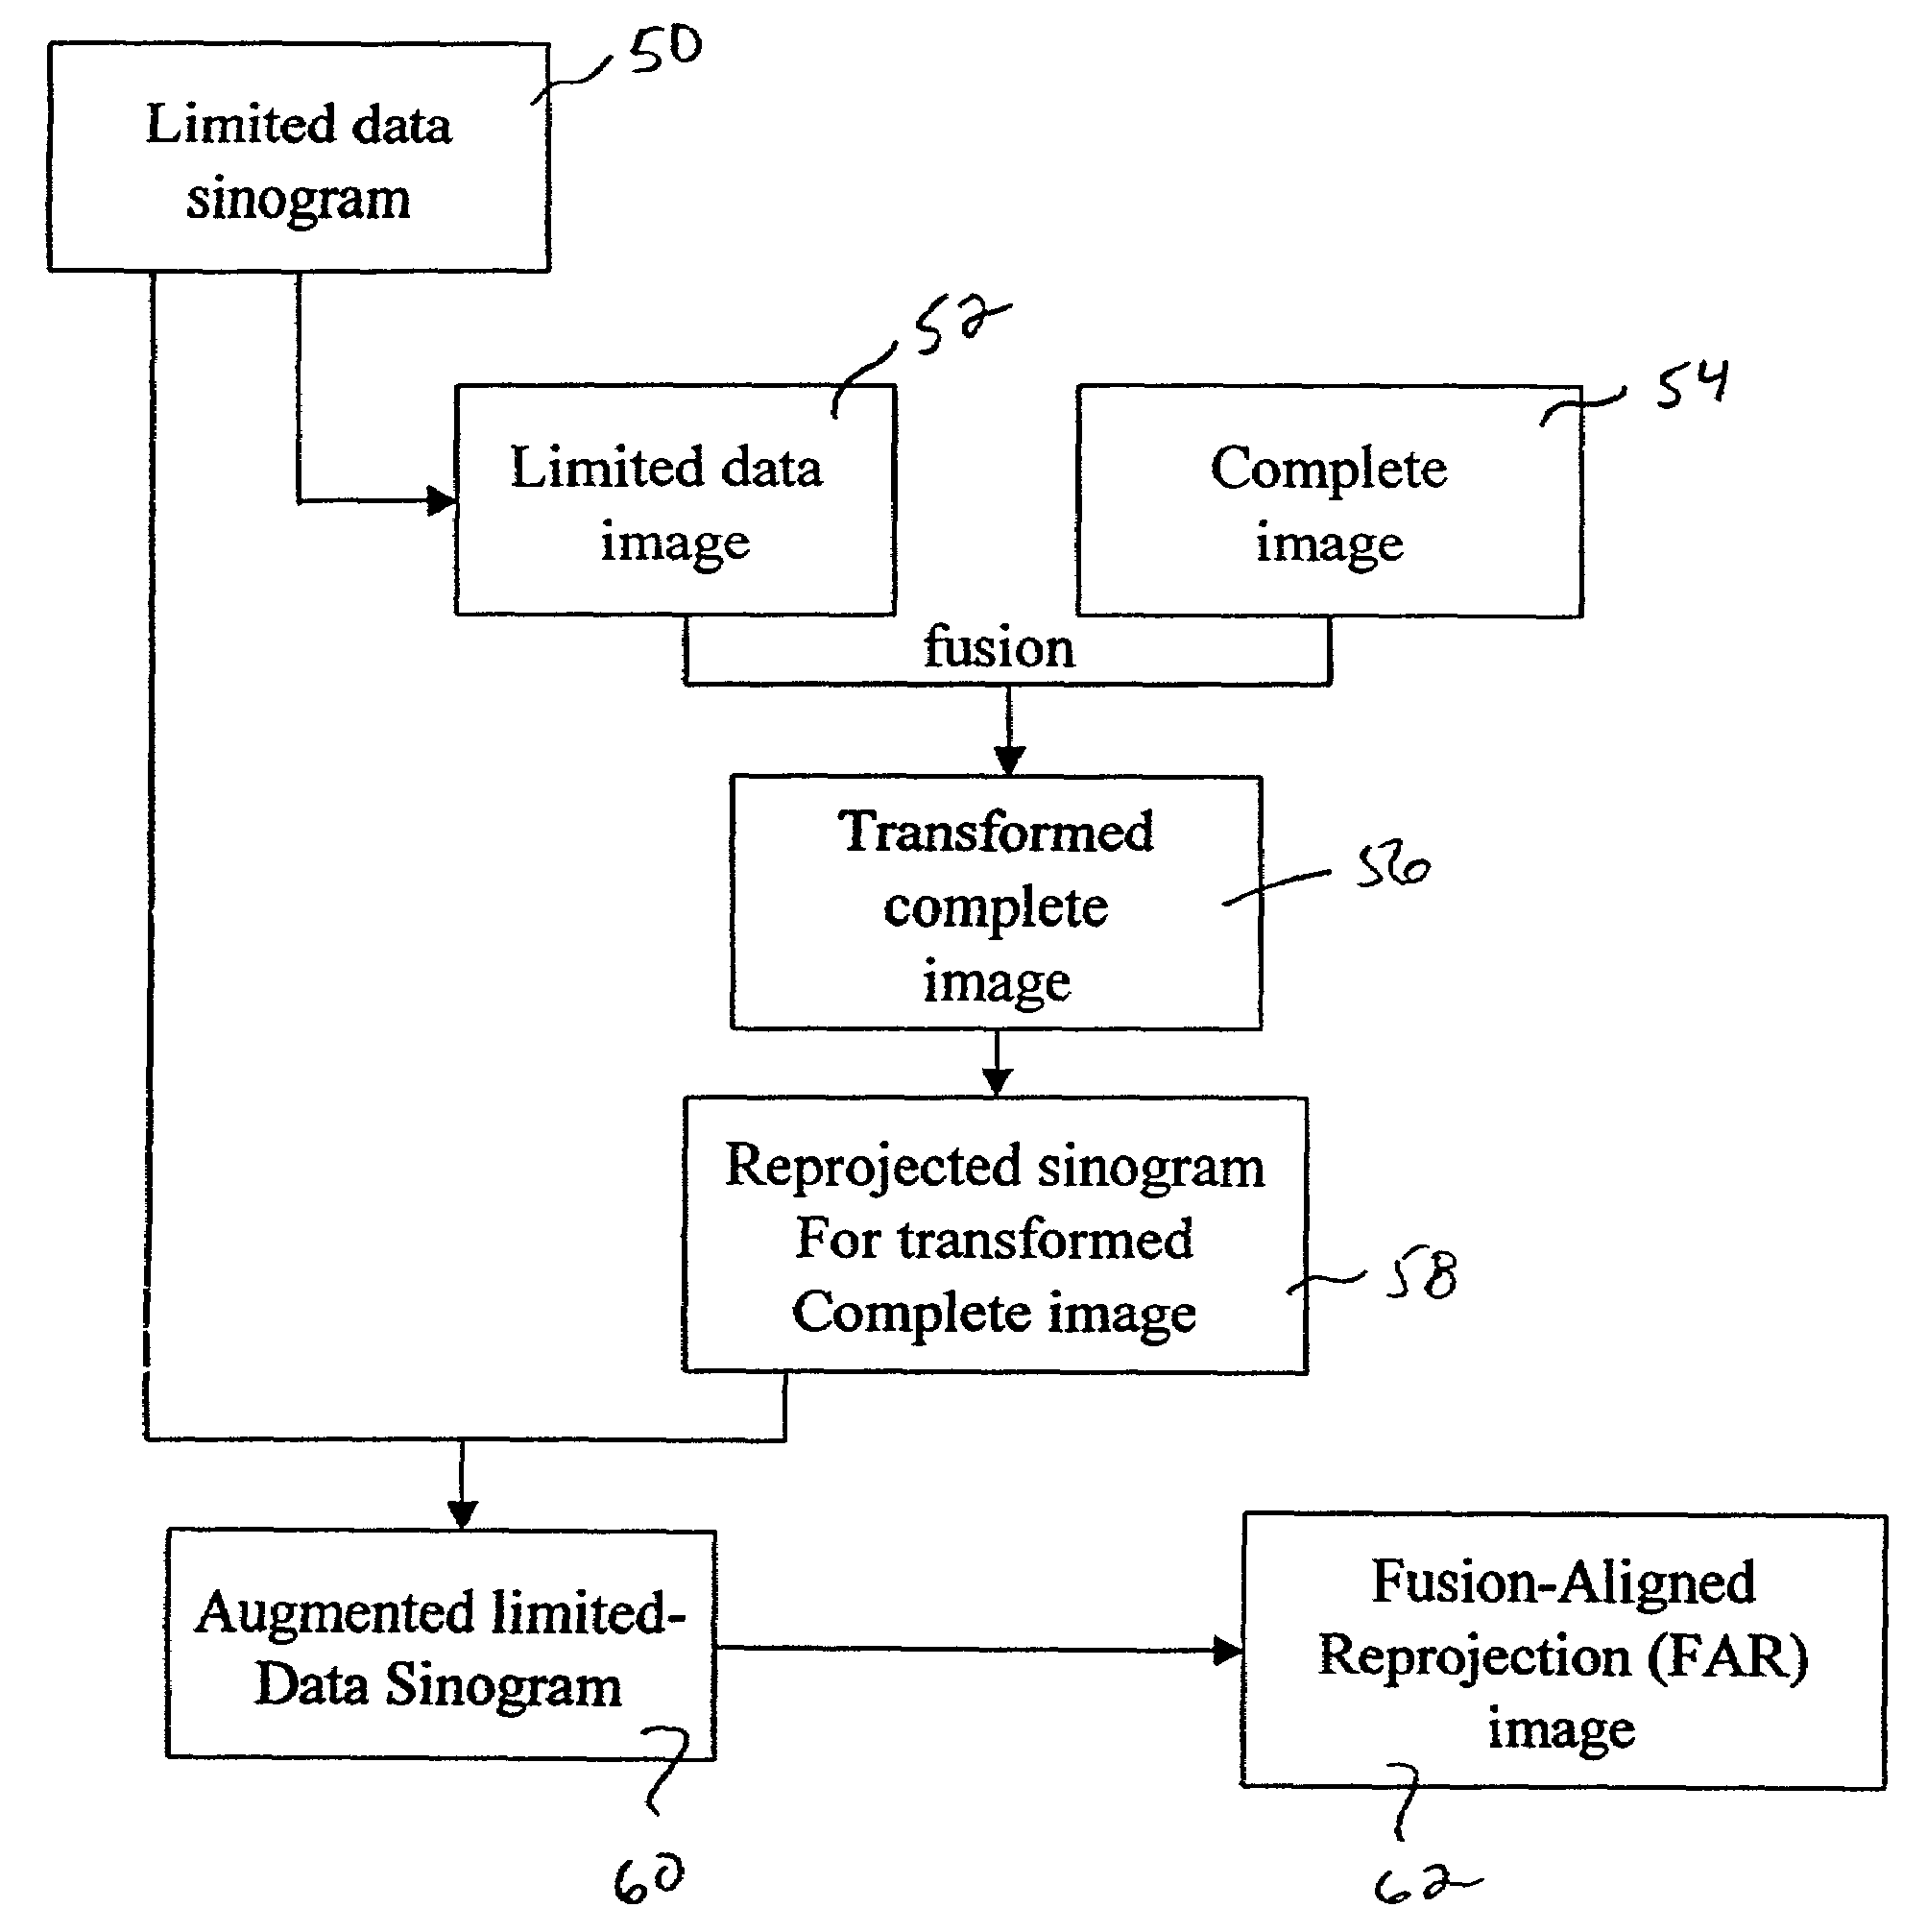 System and method for fusion-aligned reprojection of incomplete data